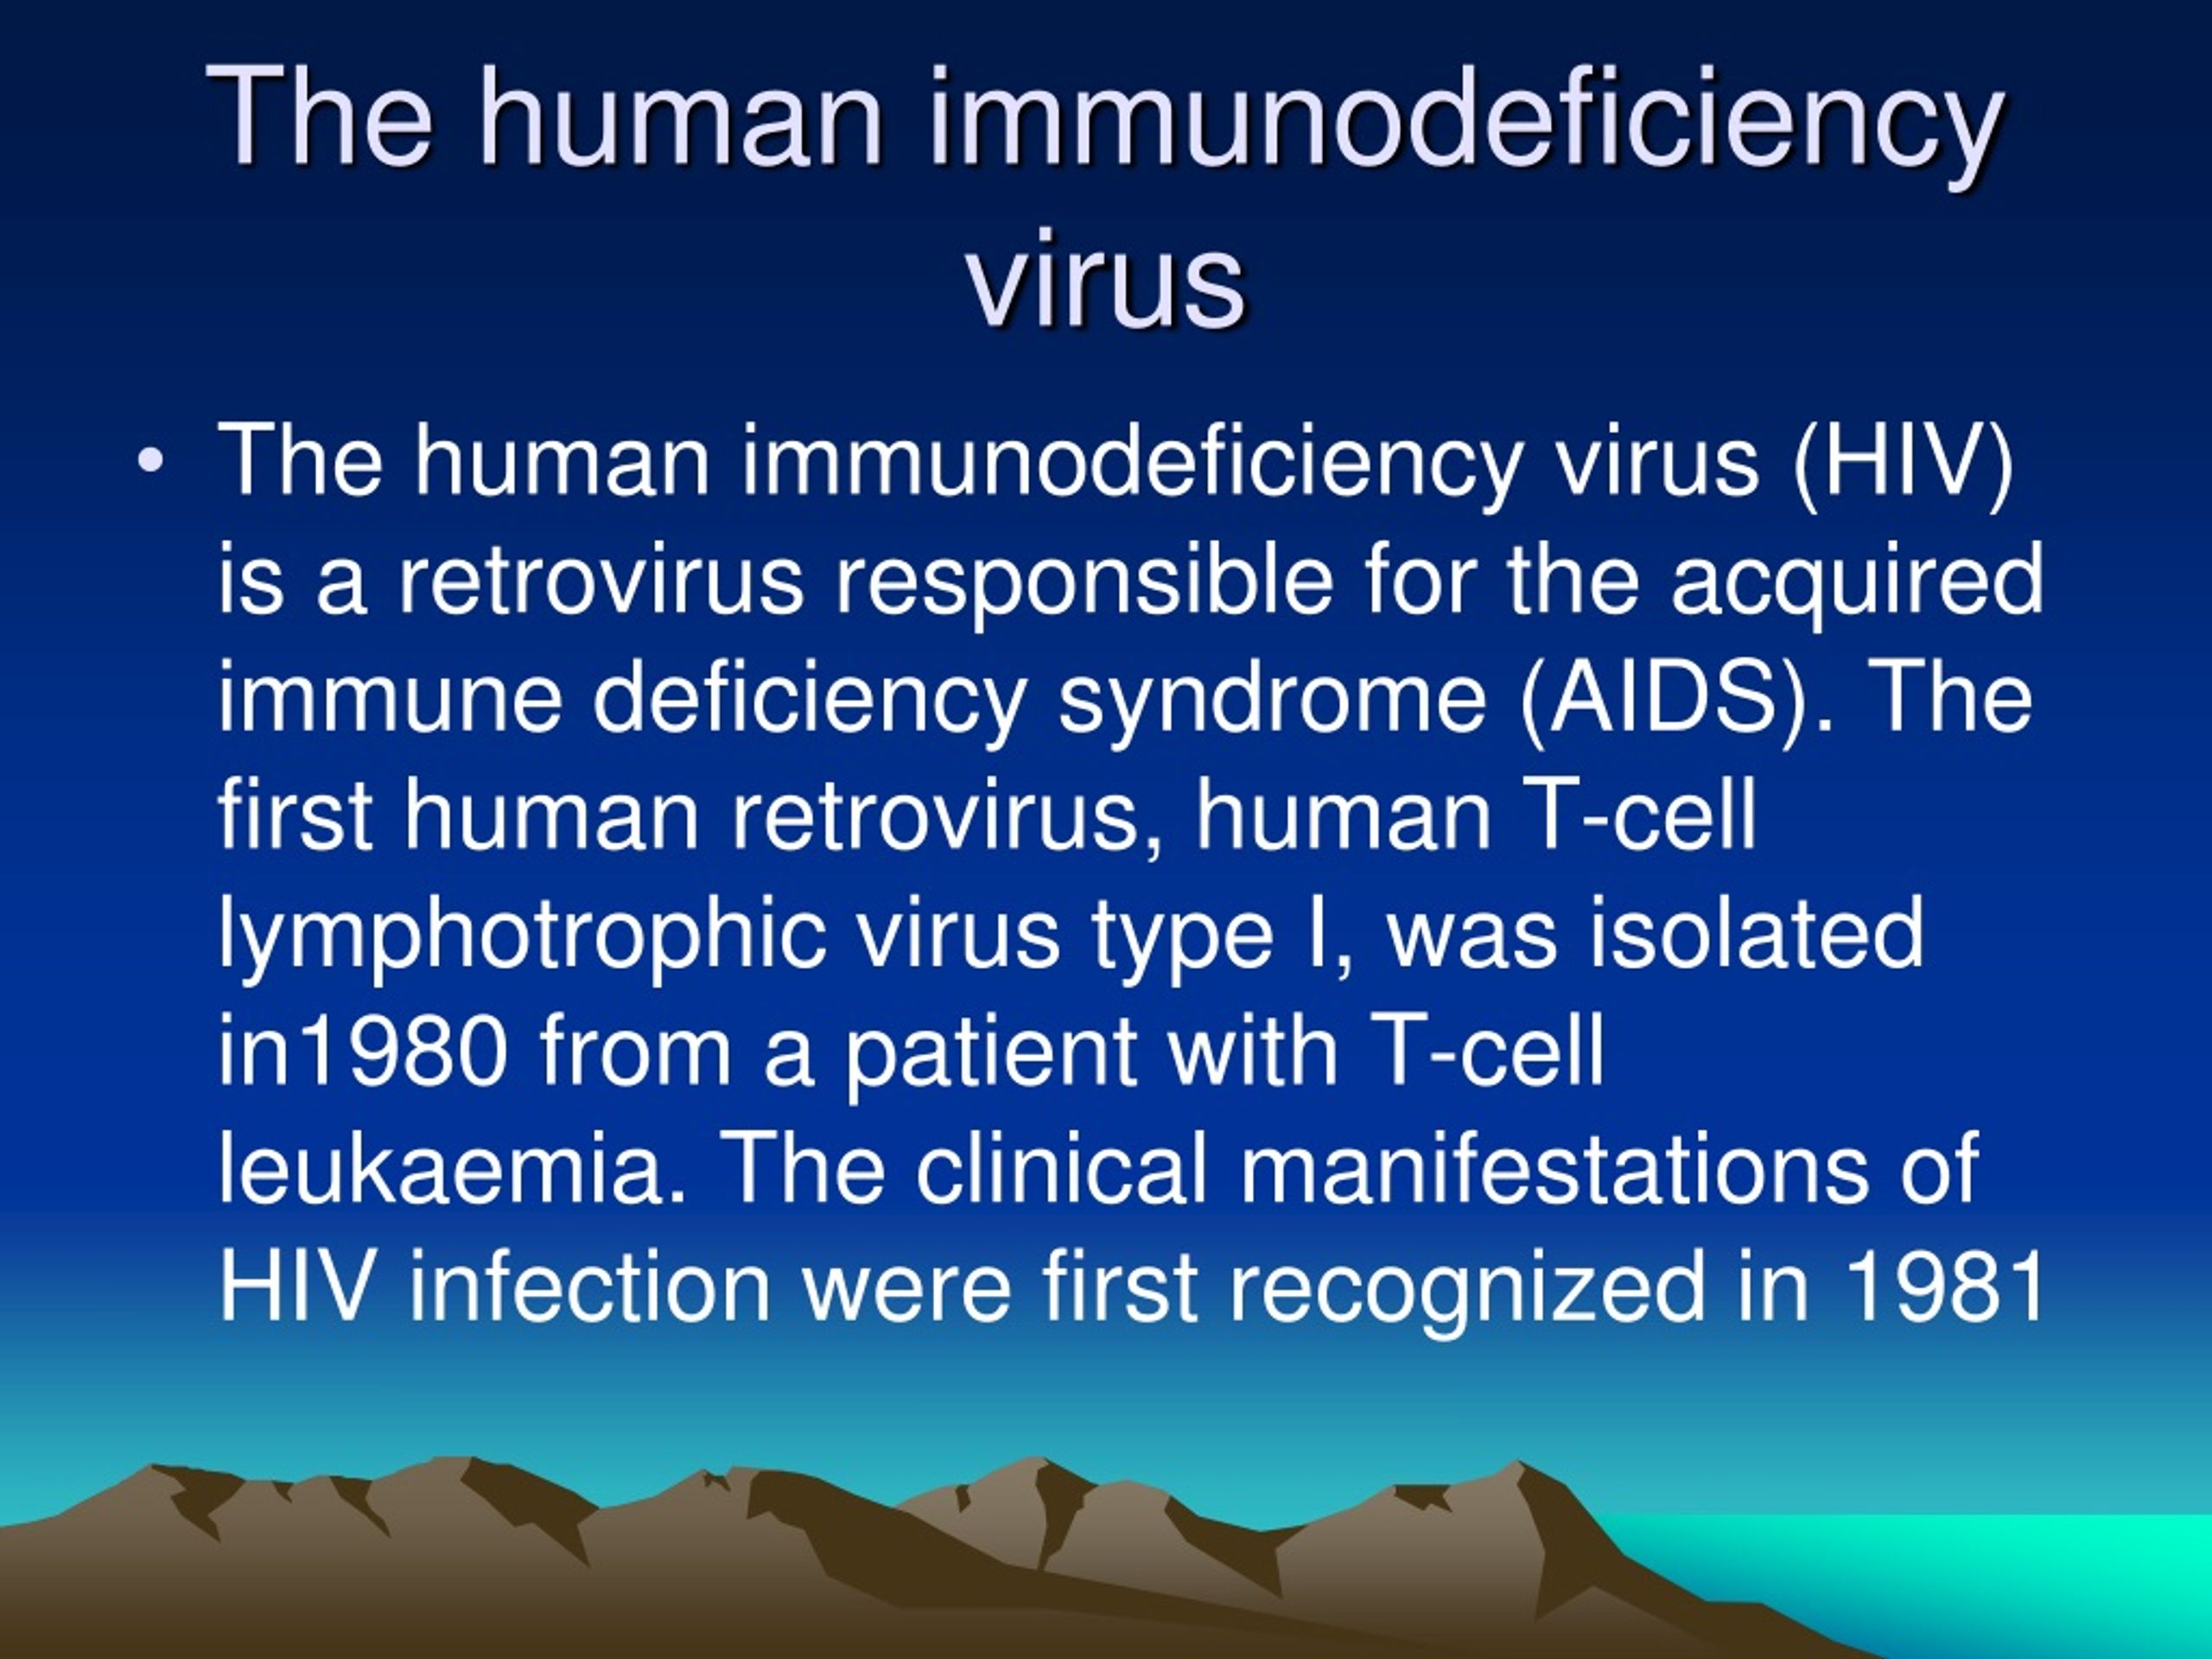 Ppt The Human Immunodeficiency Virus Powerpoint Presentation Free Download Id9014732 